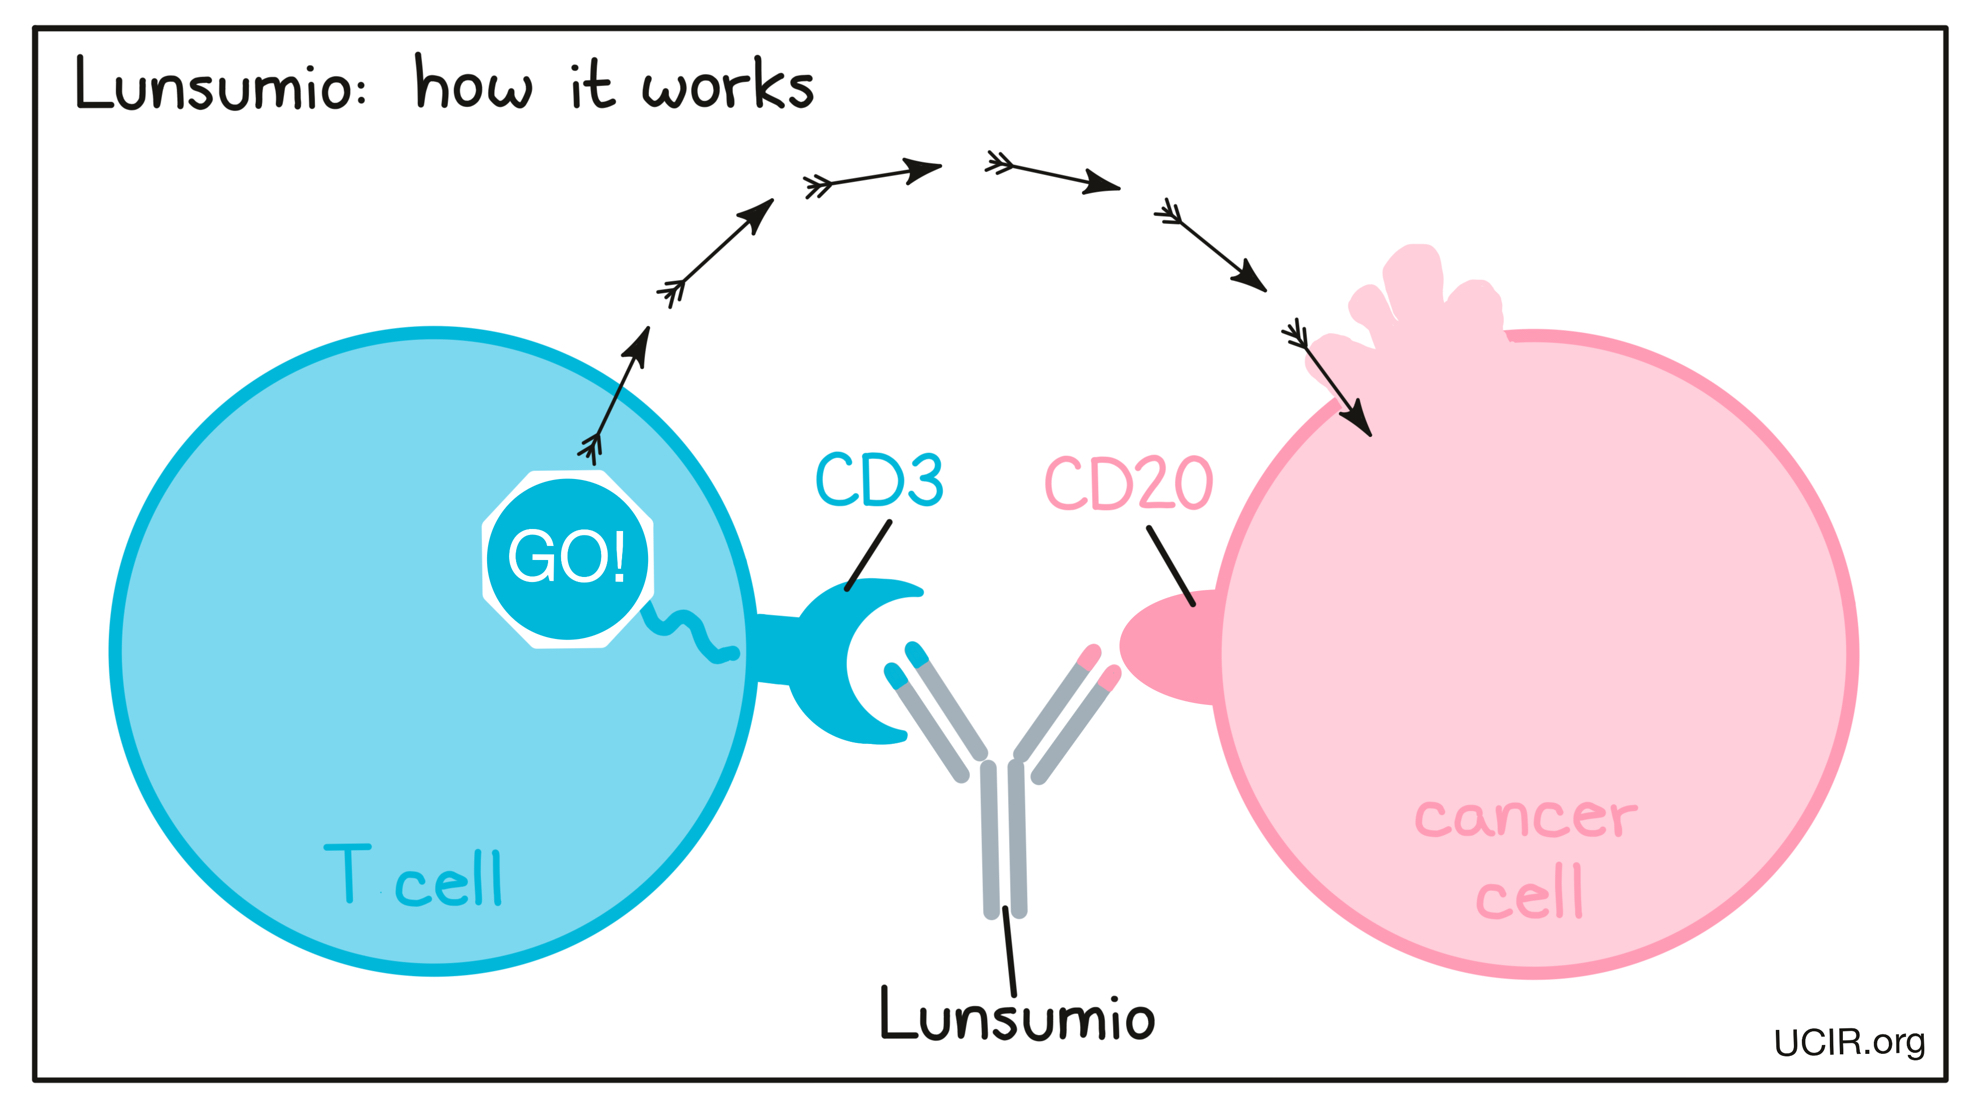 Illustration showing how Lunsumio works